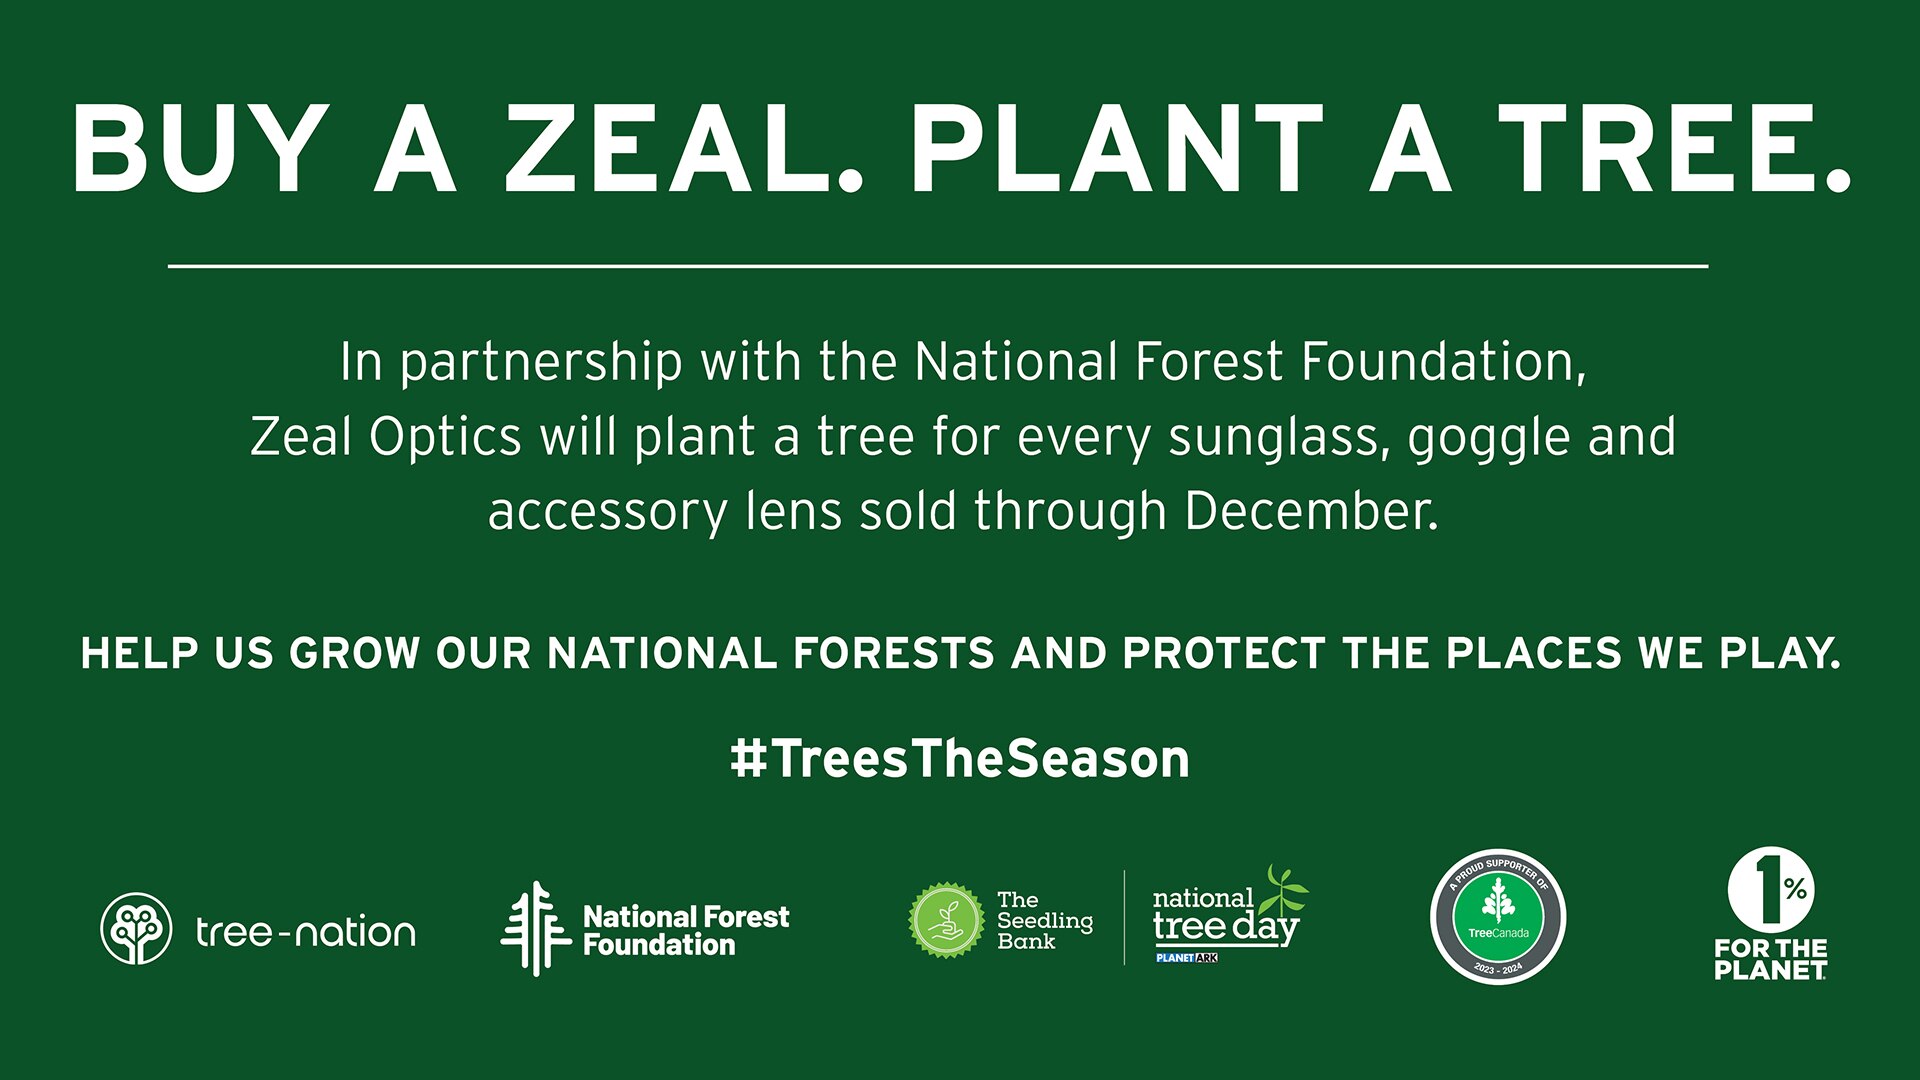  Graphic card that reads, “Buy a zeal. Plant a tree. In partnership with the National Forest Foundation, Zeal Optics will plant a tree for every sunglass, goggle and accessory lens sold through December.”